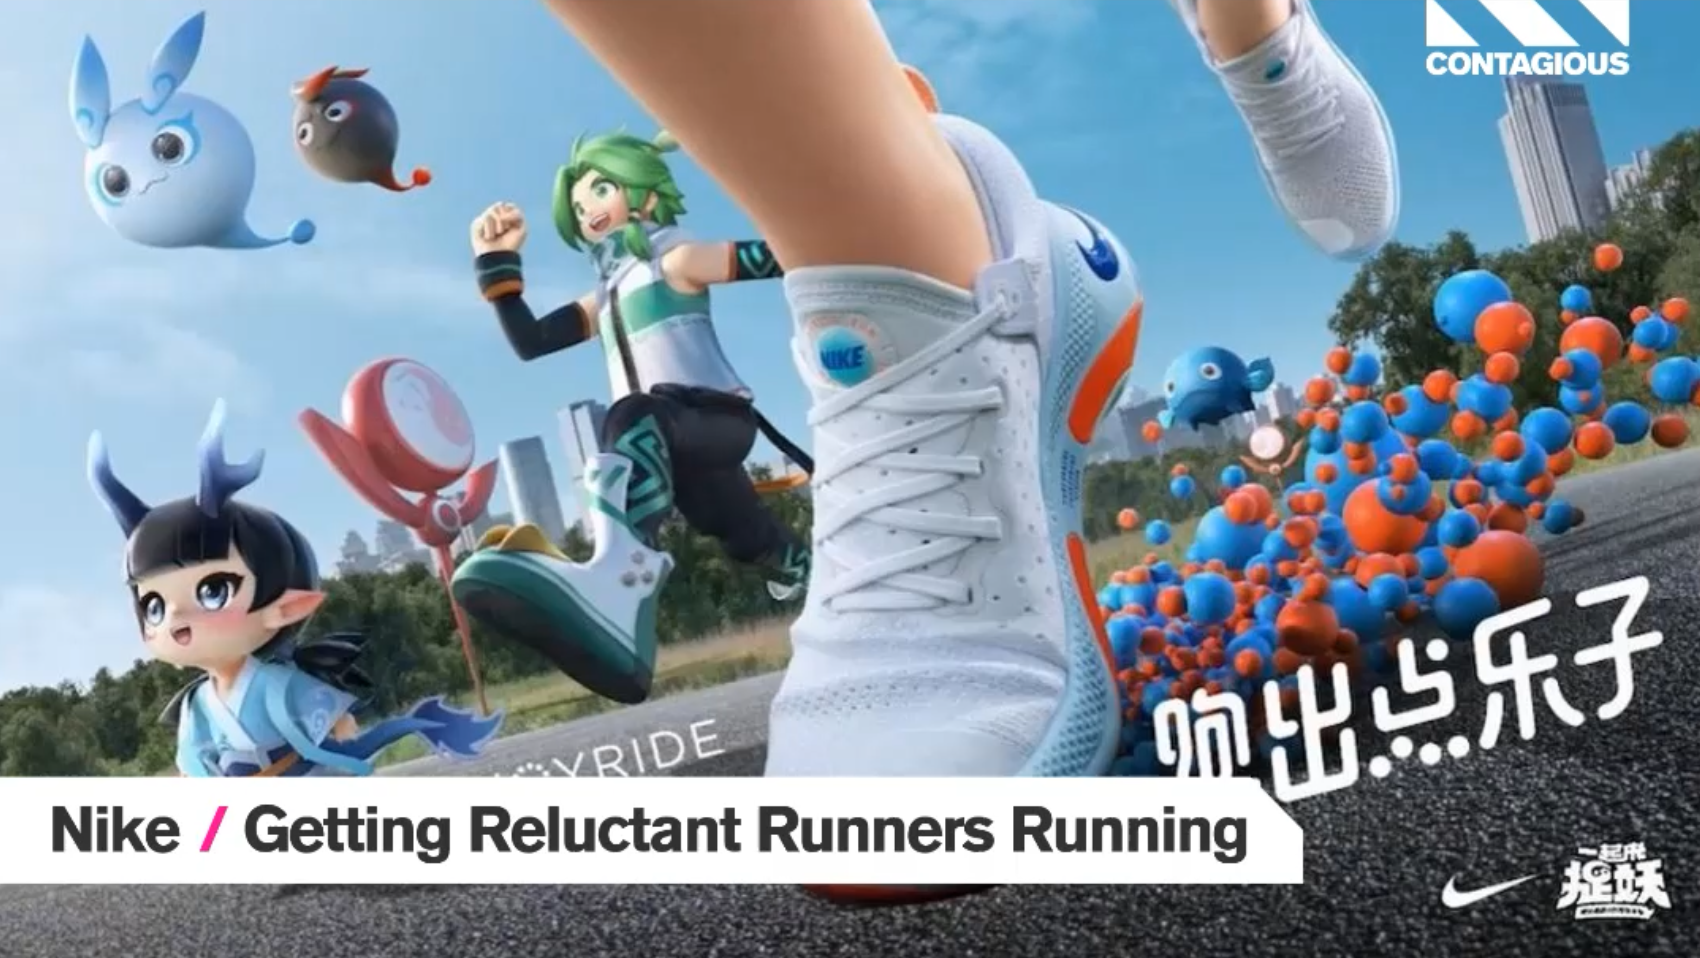 Audiense blog - Nike | Getting Reluctant Runners Running